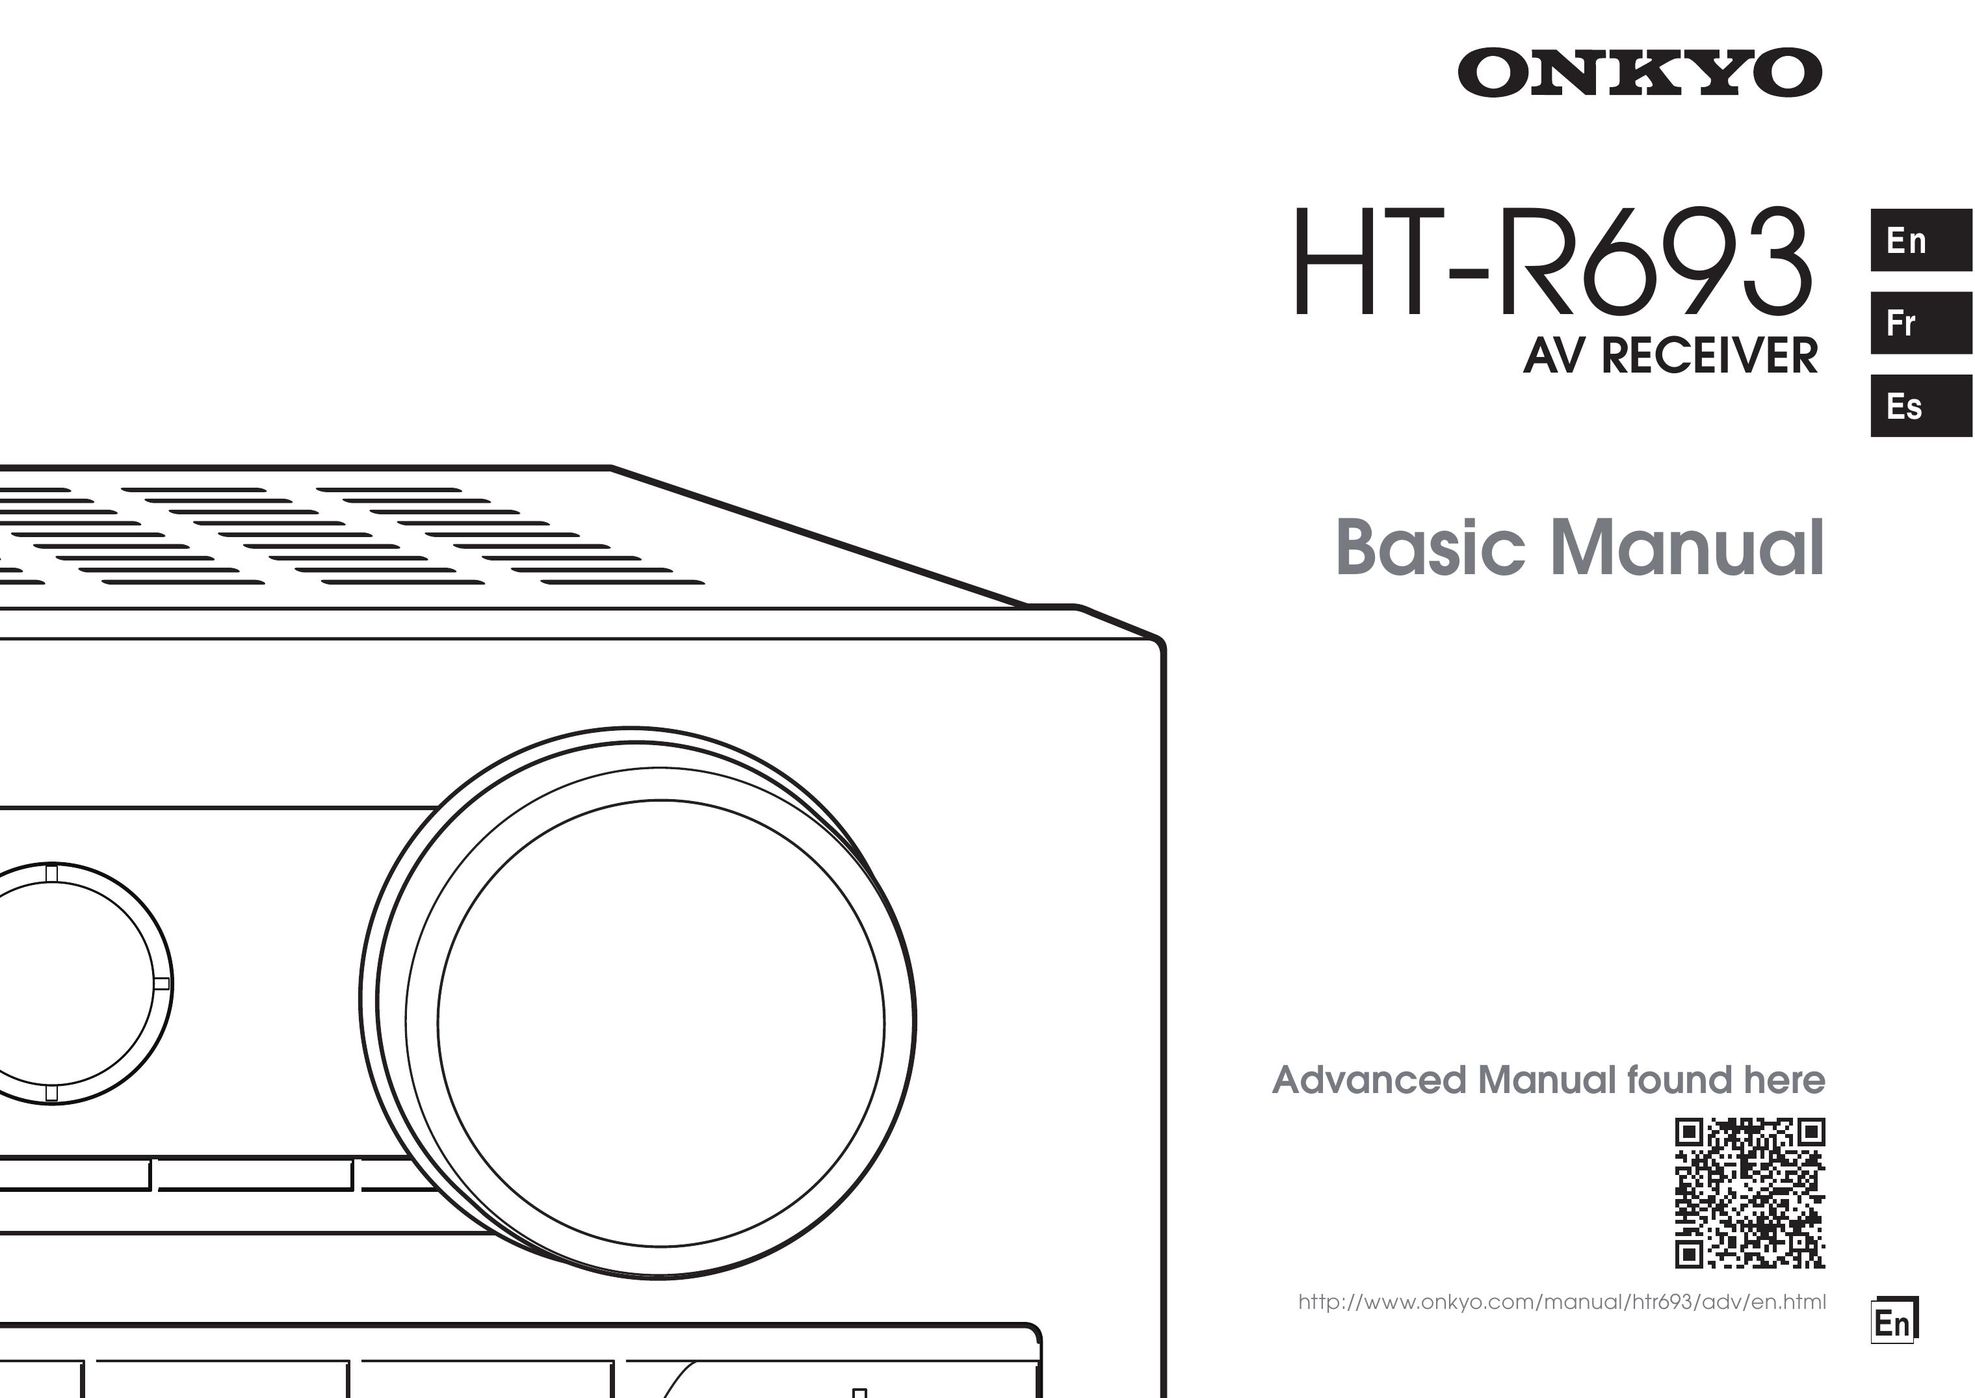 Onkyo HT-R693 Stereo Receiver User Manual